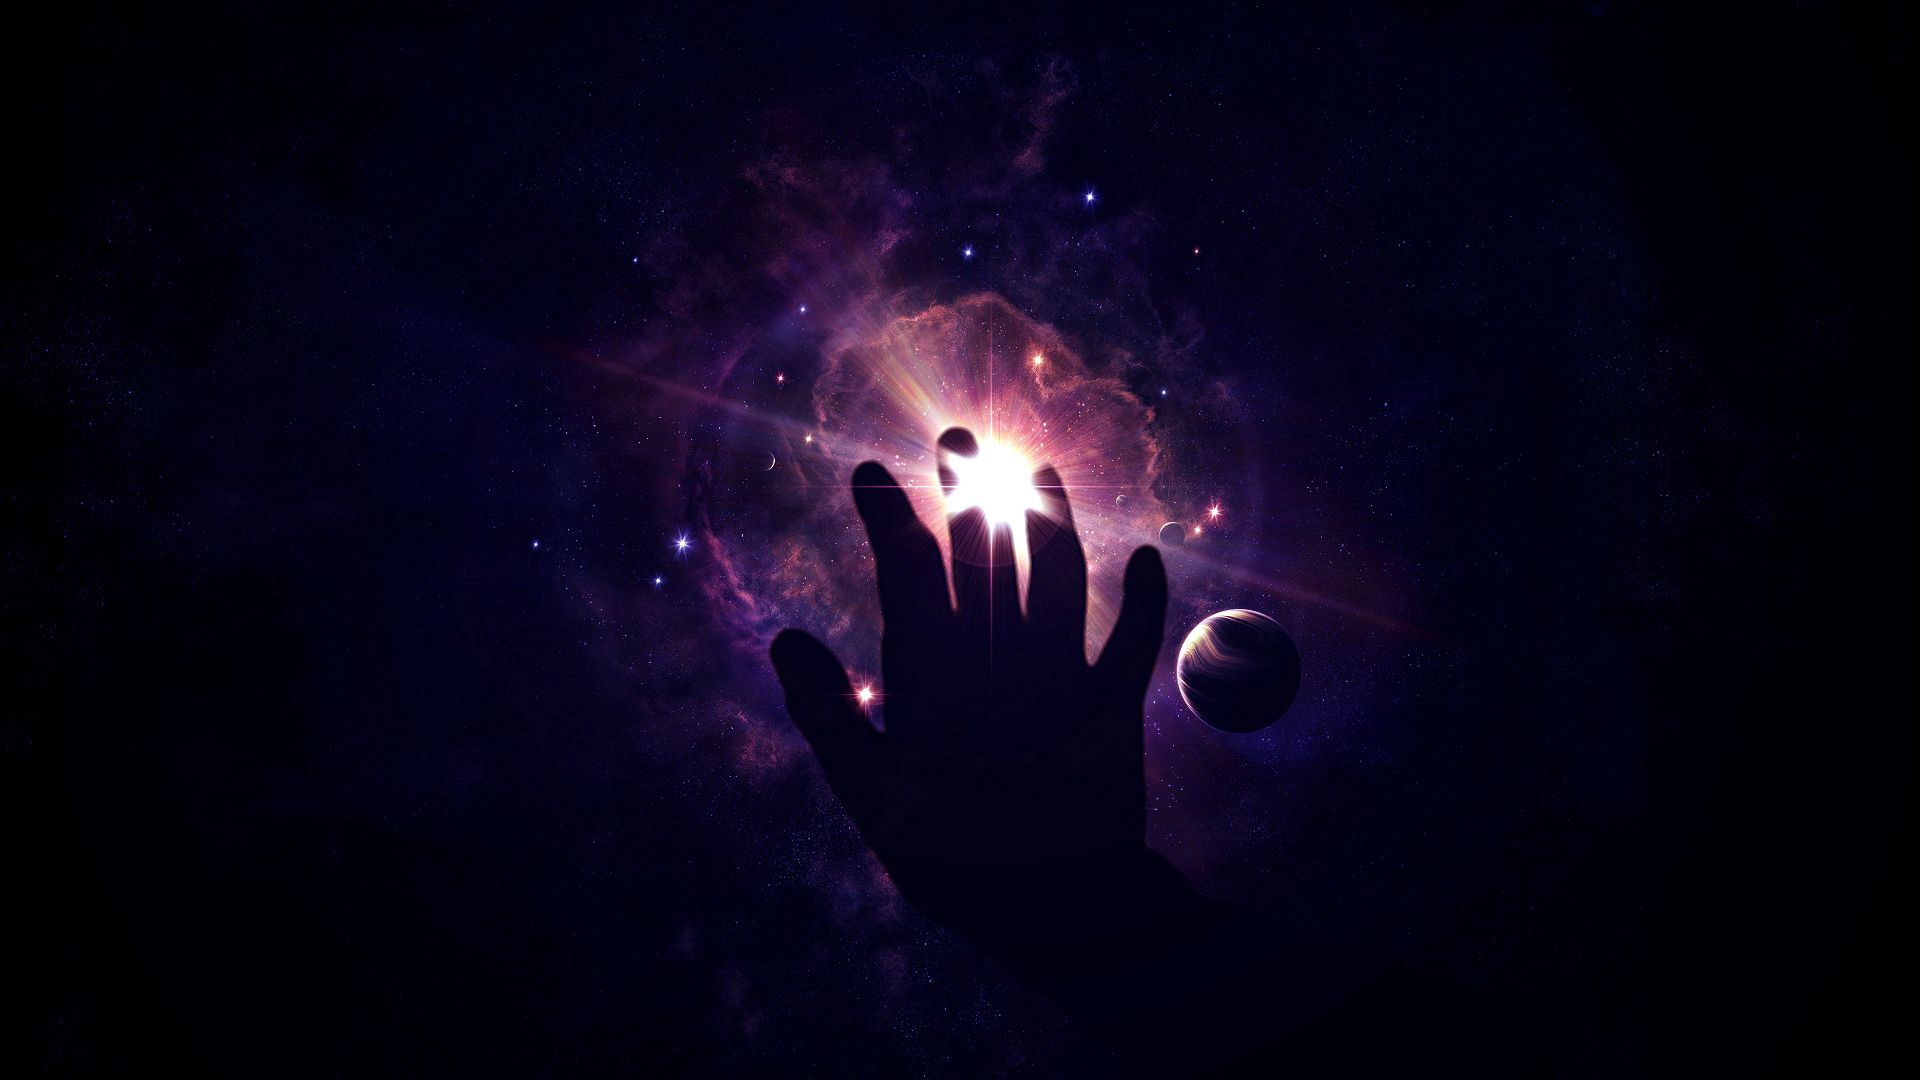 dark, surrealism, stars, hand, space, touching, touch, parties, side